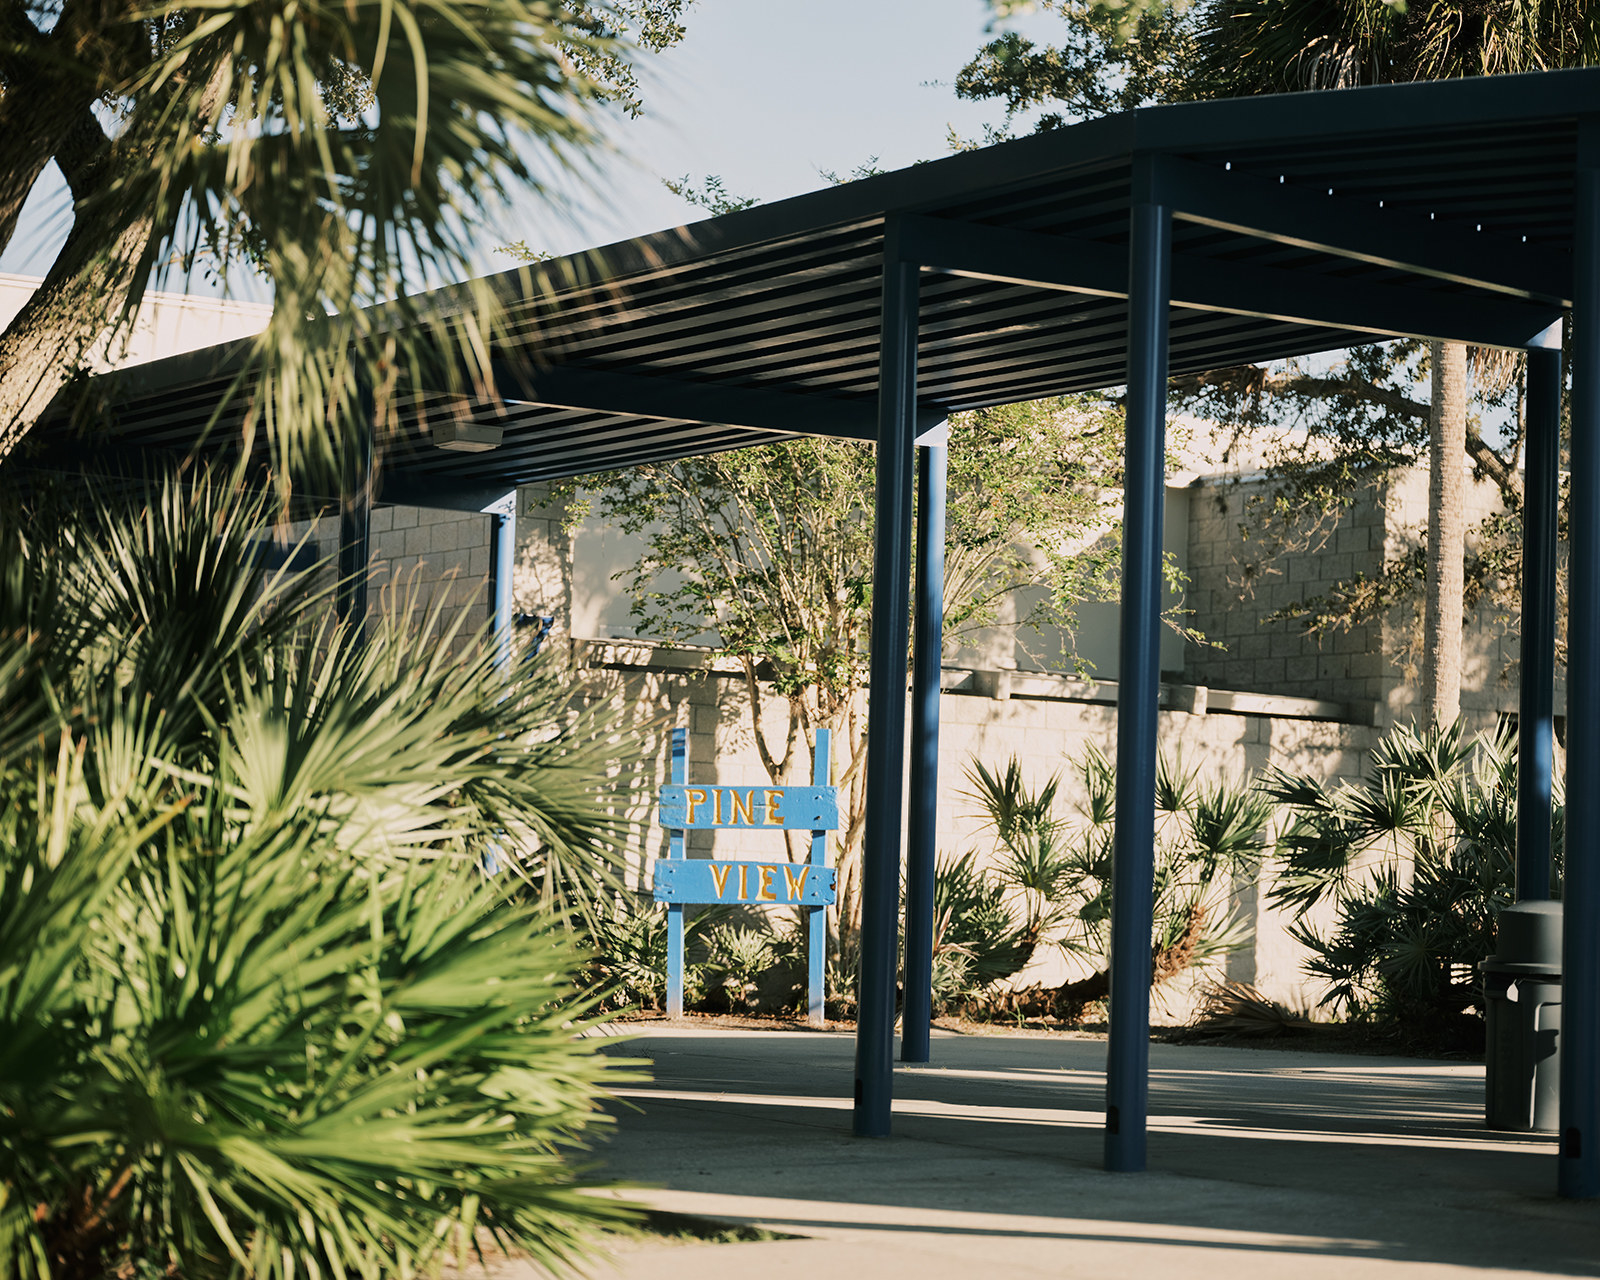 A photo of Pine View School&#x27;s entrance. There is a bright blue wooden sign that reads &quot;PINE VIEW&quot; in a hand made font. There are palm trees around.